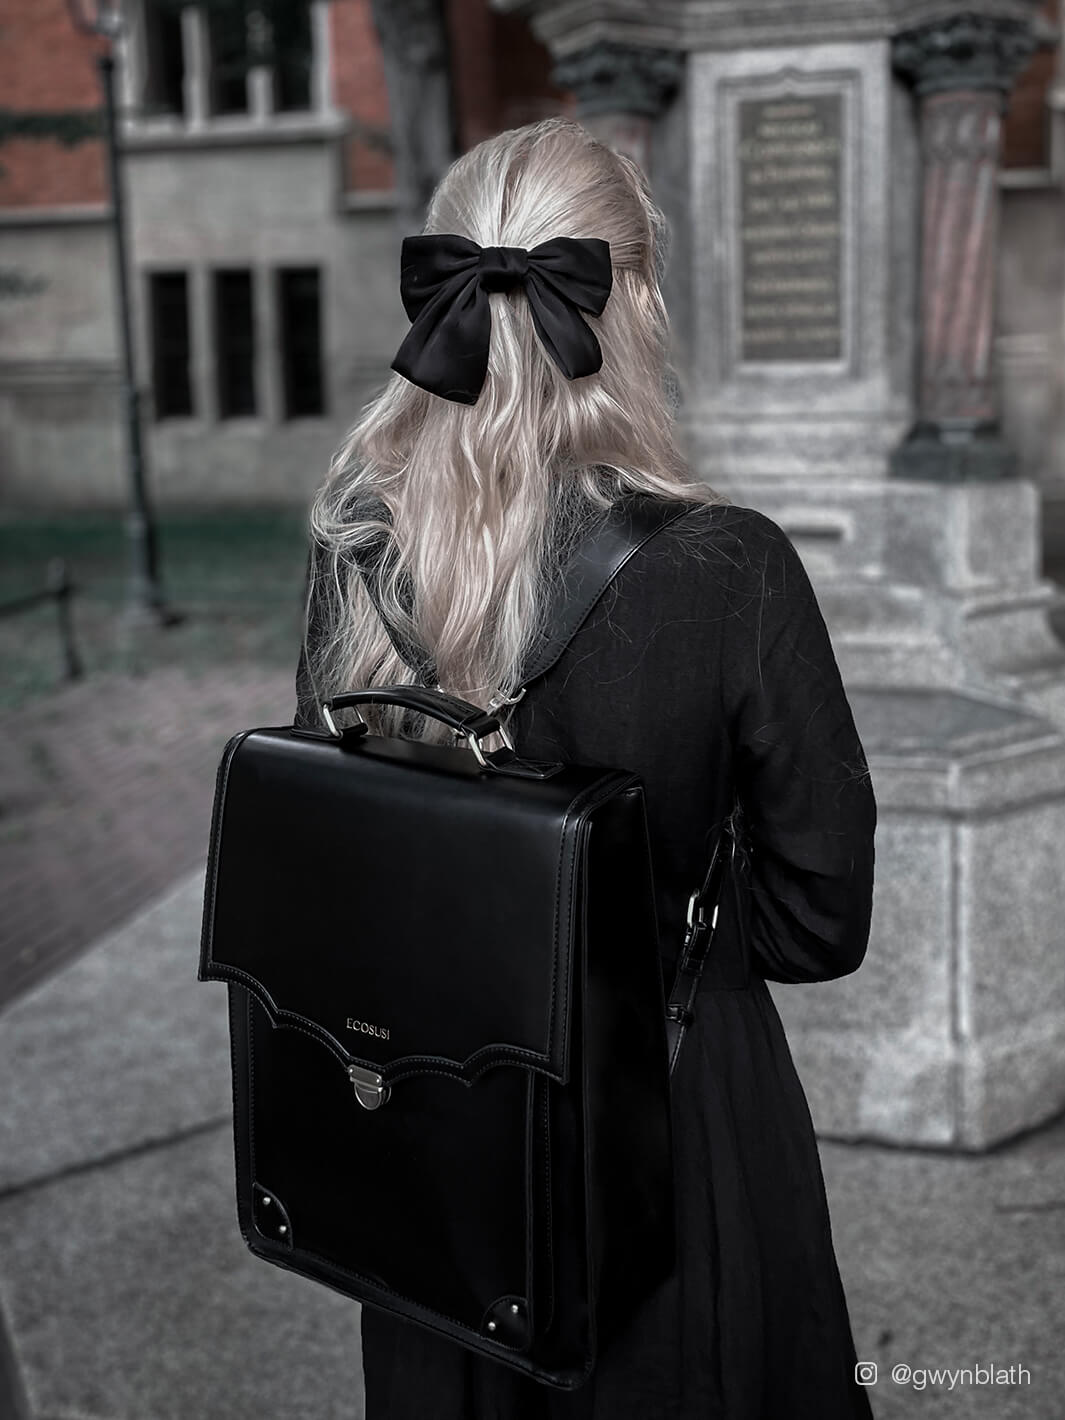 Ecosusi Aria Vintage Backpack,magical academy-inspired design